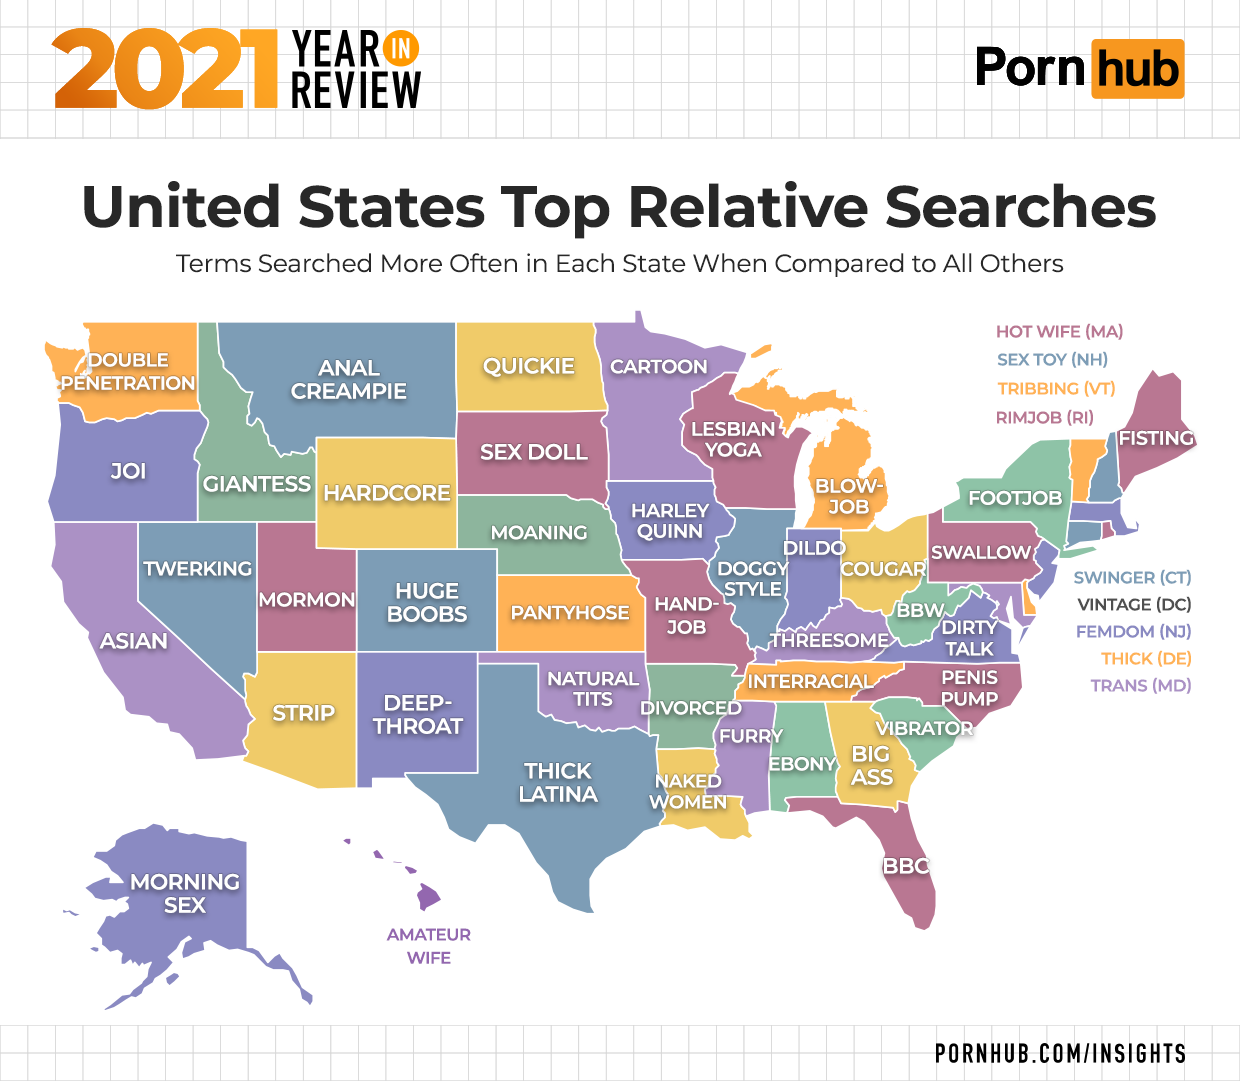 1-pornhub-insights-2021-year-in-review-map-top-relative-terms-united-states-map.png